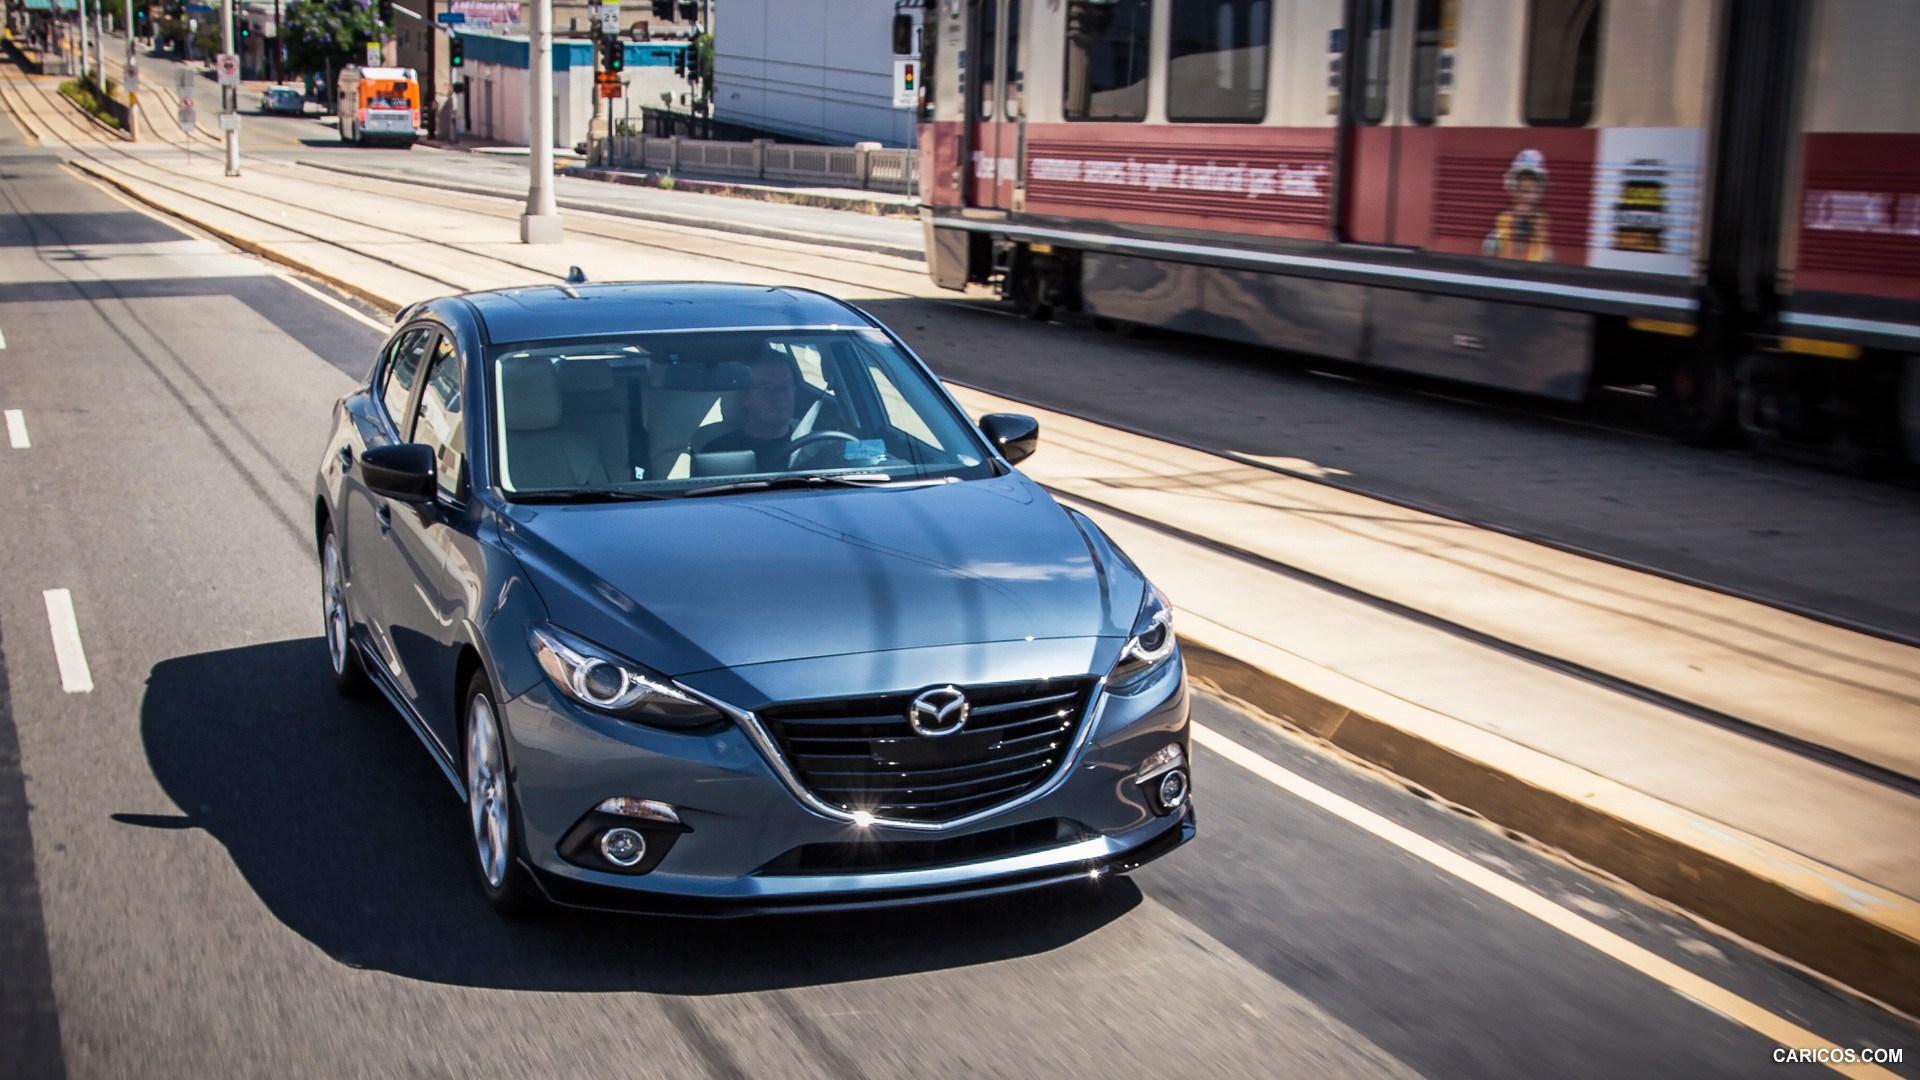 2015 Mazda 3 5D s Touring 6MT (Blue Reflex)  - Front, #14 of 27